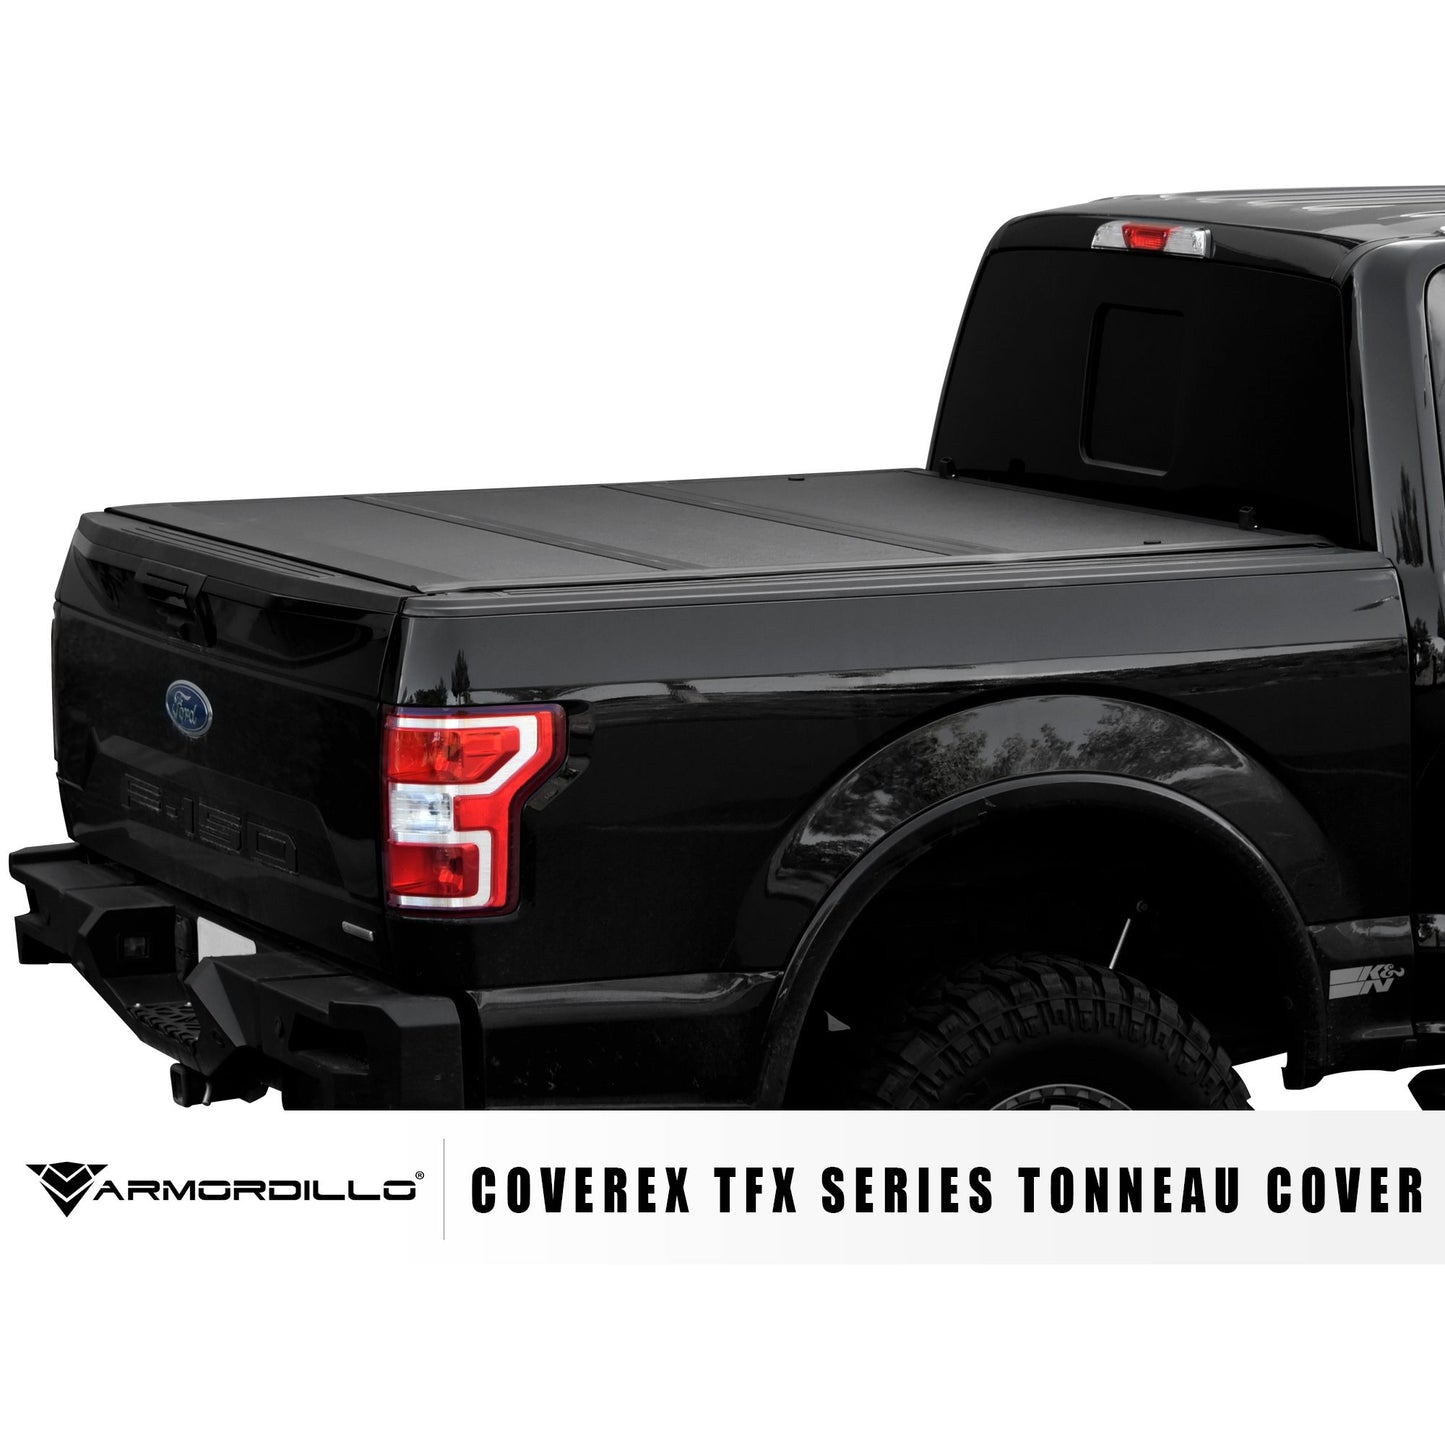 Armordillo 2007-2013 Toyota Tundra CoveRex TFX Series Folding Truck Bed Tonneau Cover (6.5 Ft Bed) 8705377